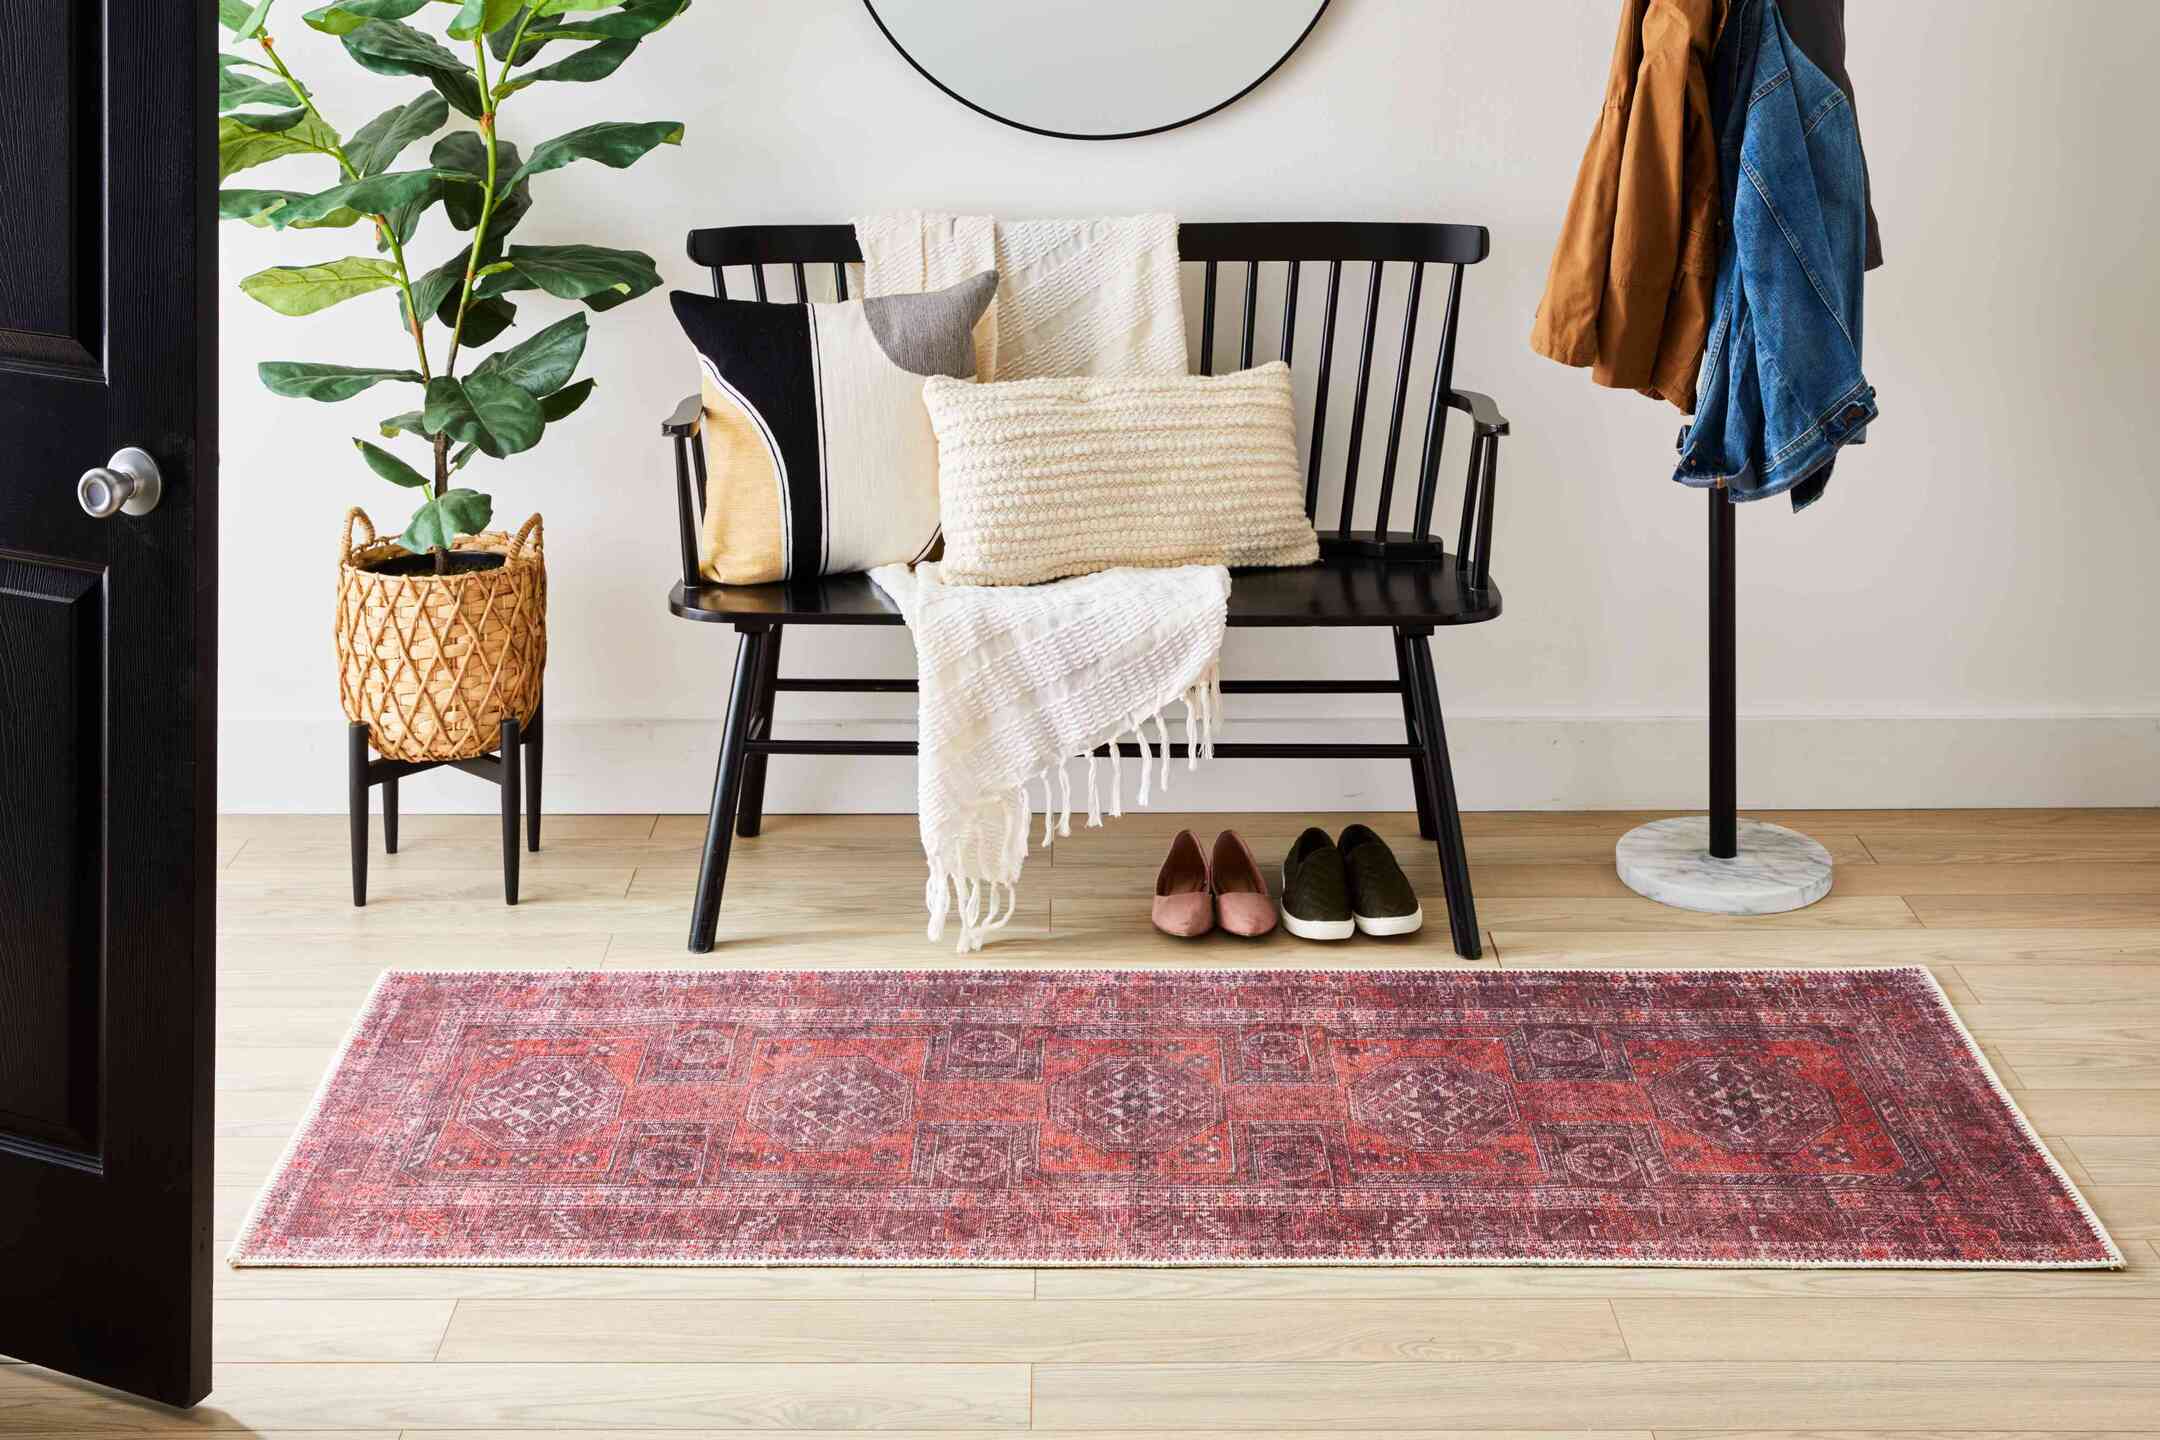 https://storables.com/wp-content/uploads/2023/10/11-unbelievable-rugs-for-entryway-for-2023-1697451756.jpg